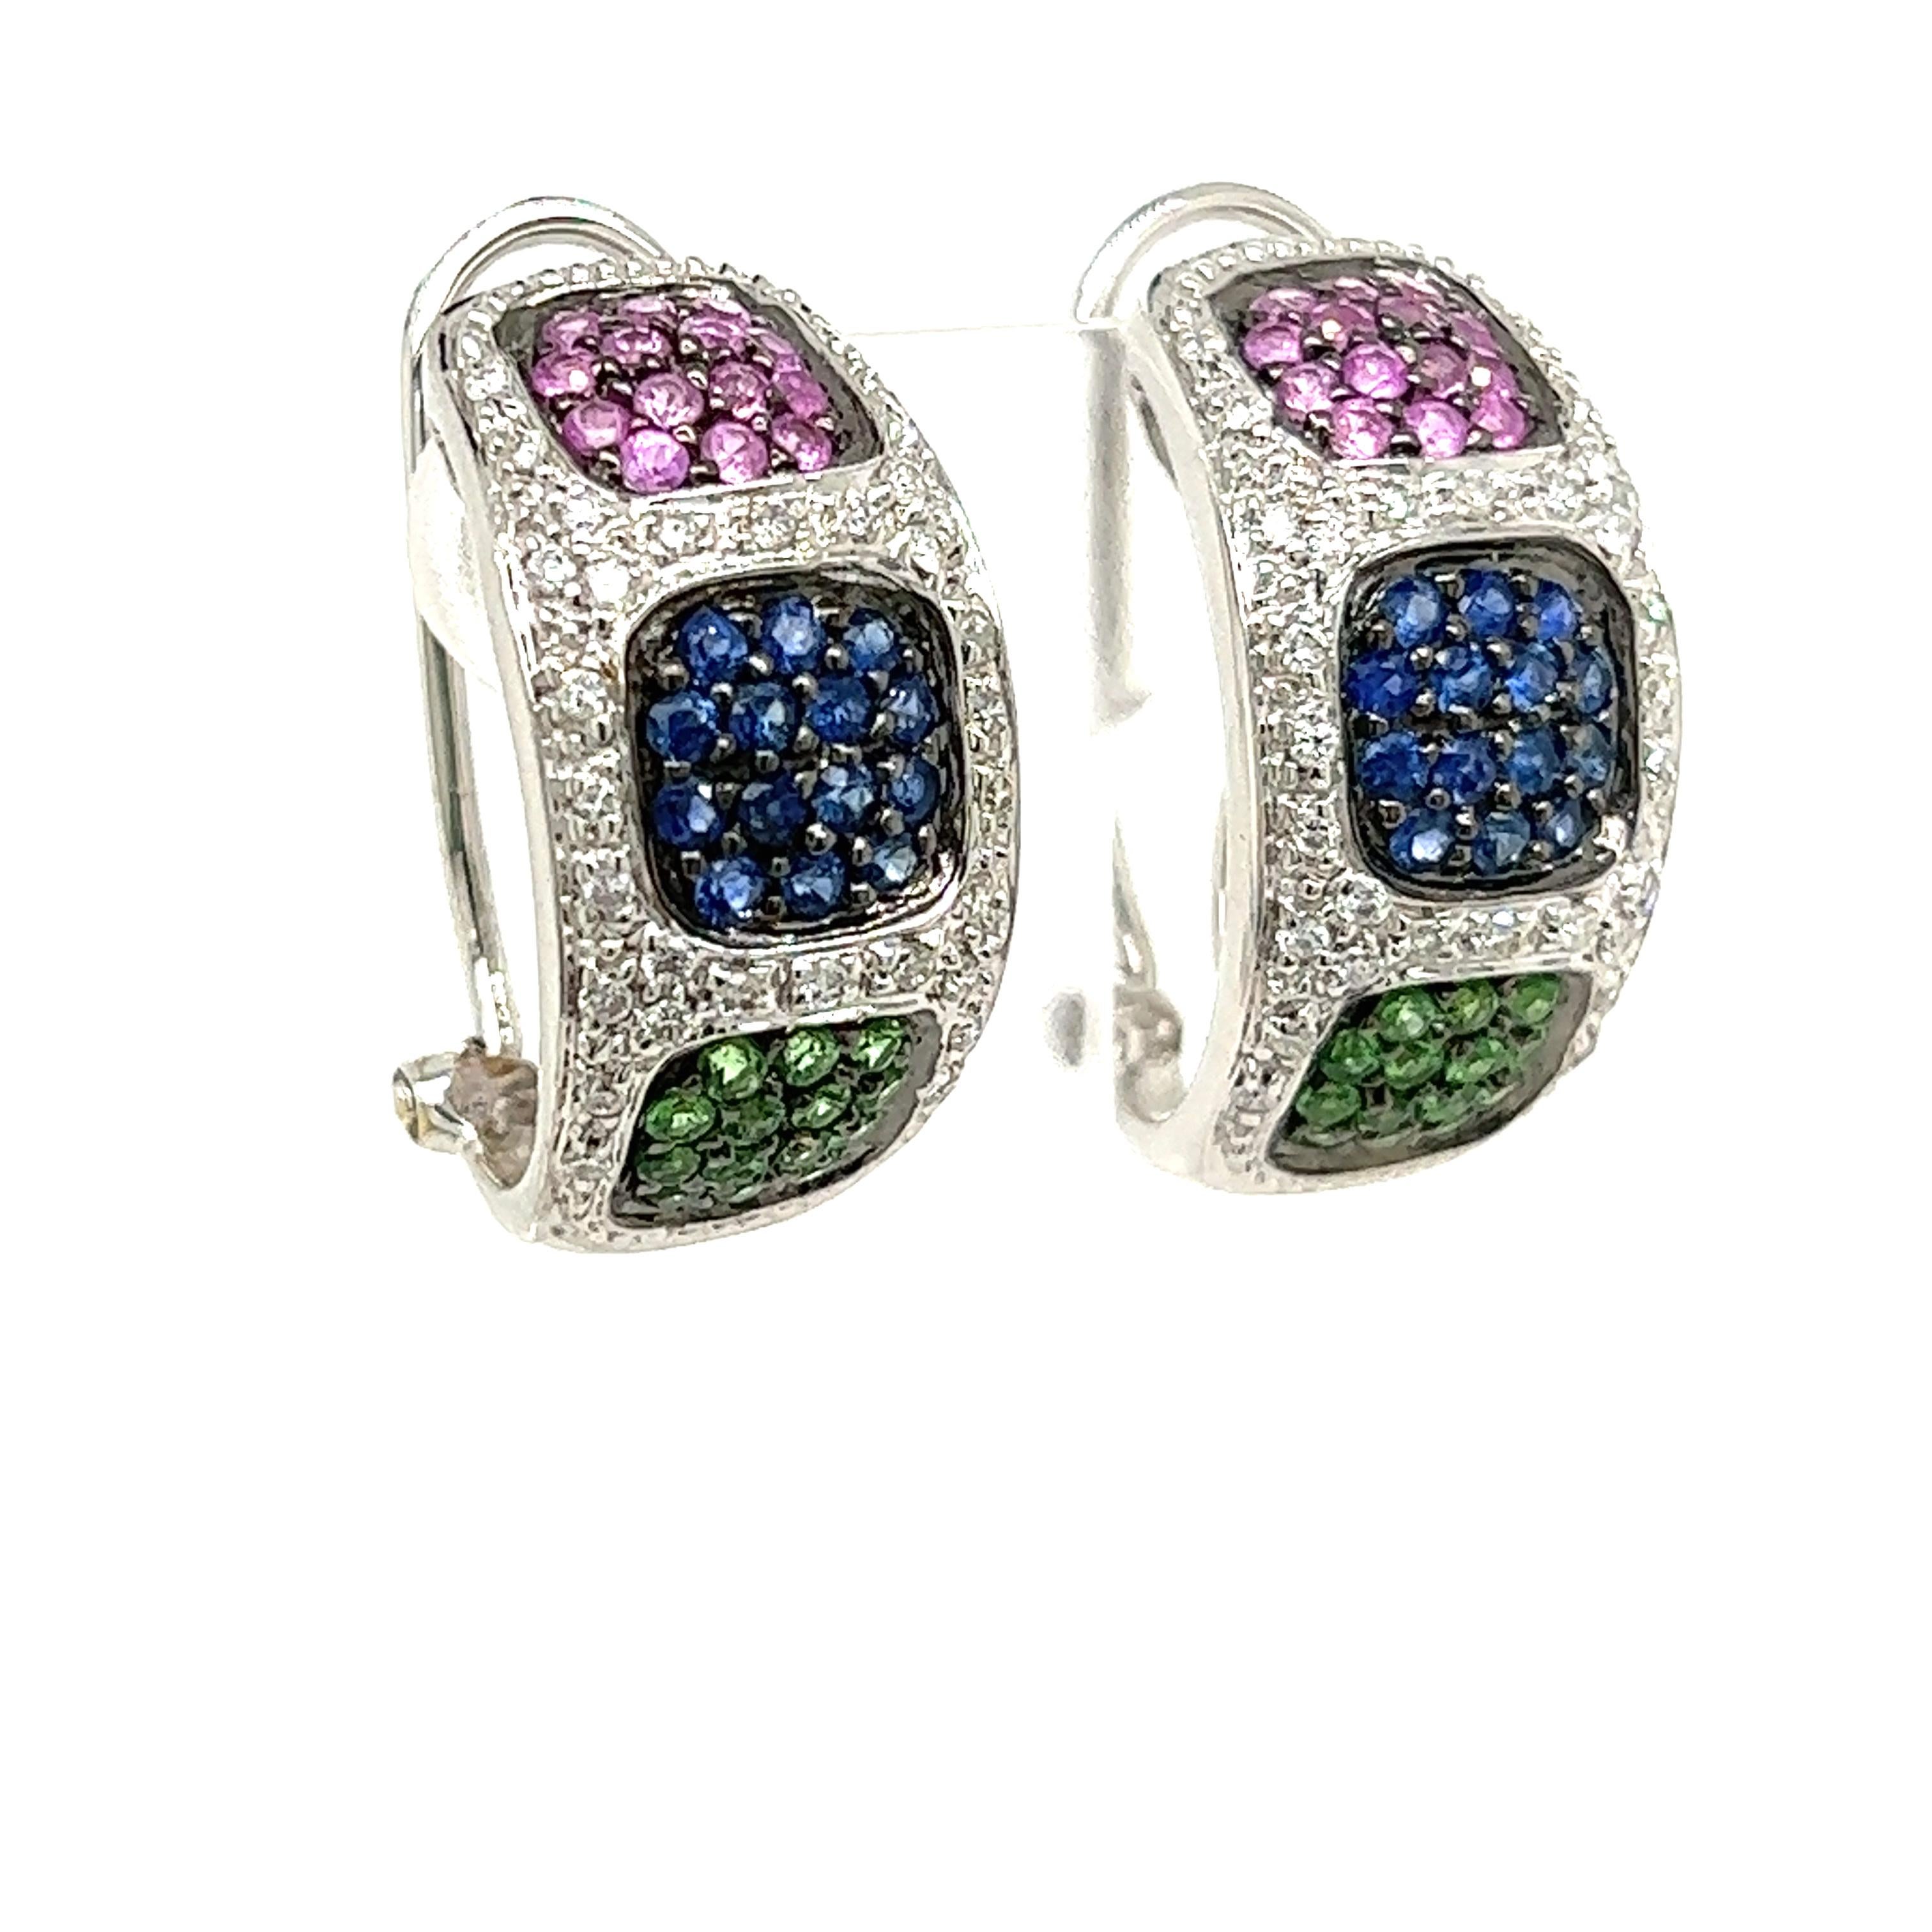 These earrings add a pop of color to your wardrobe. With .97cts of blue and pink sapphires, .37cts of green garnets and 1.05cts of white diamonds, G color, VS2 clarity, they are sure to sparkle!